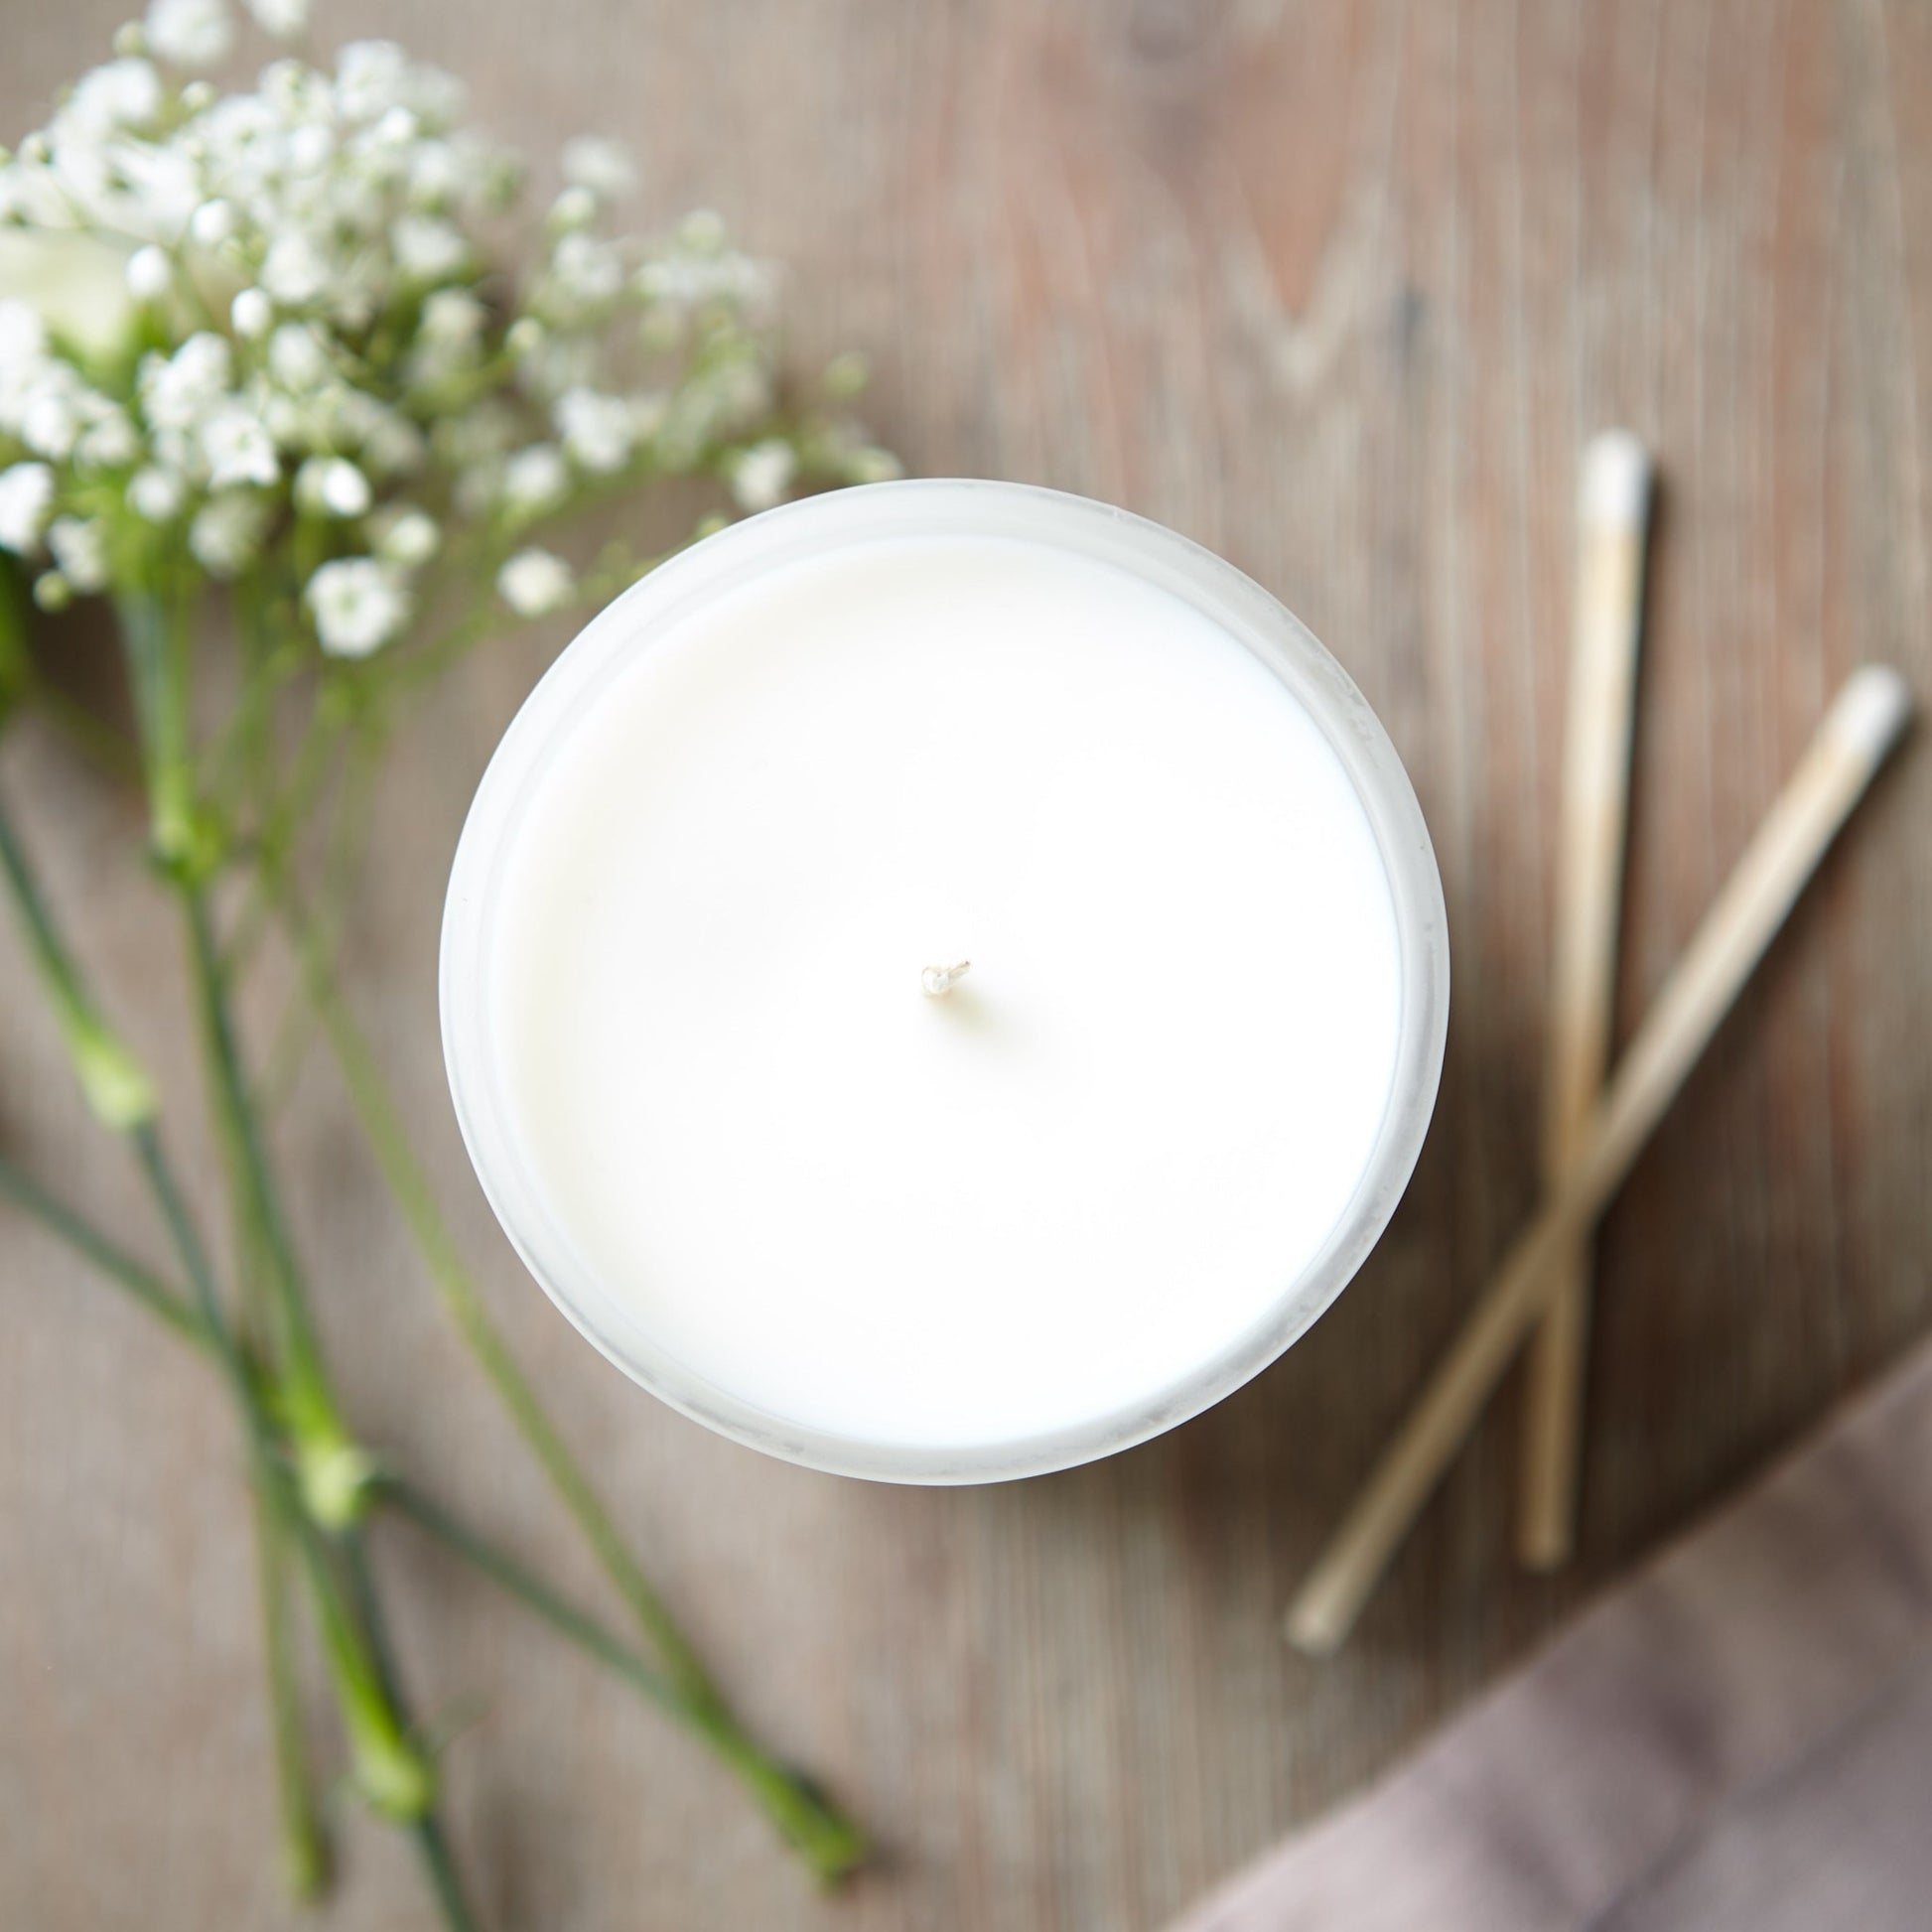 Mum To Be Gift Candle - Kindred Fires